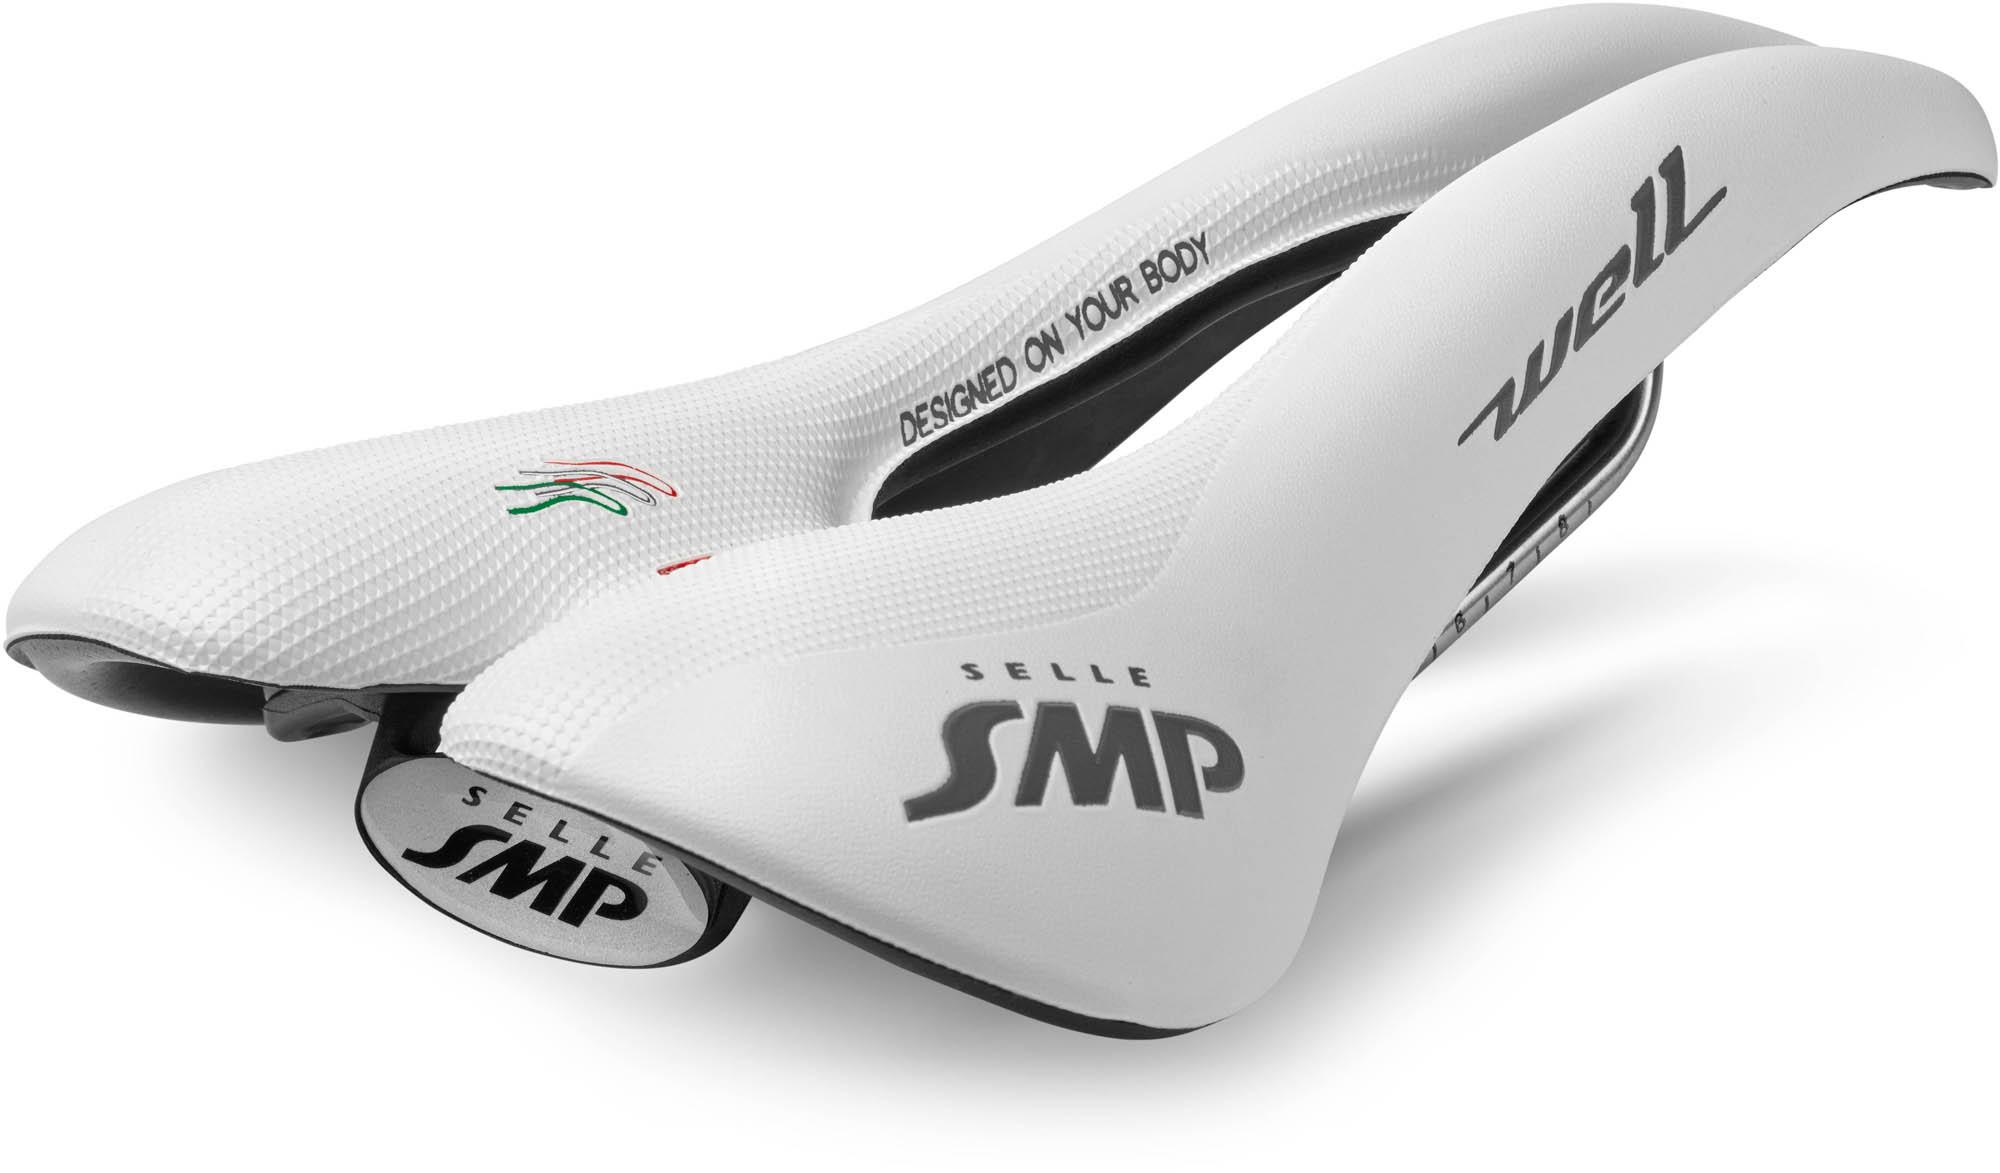 Selle Smp Well Bike Saddle - White